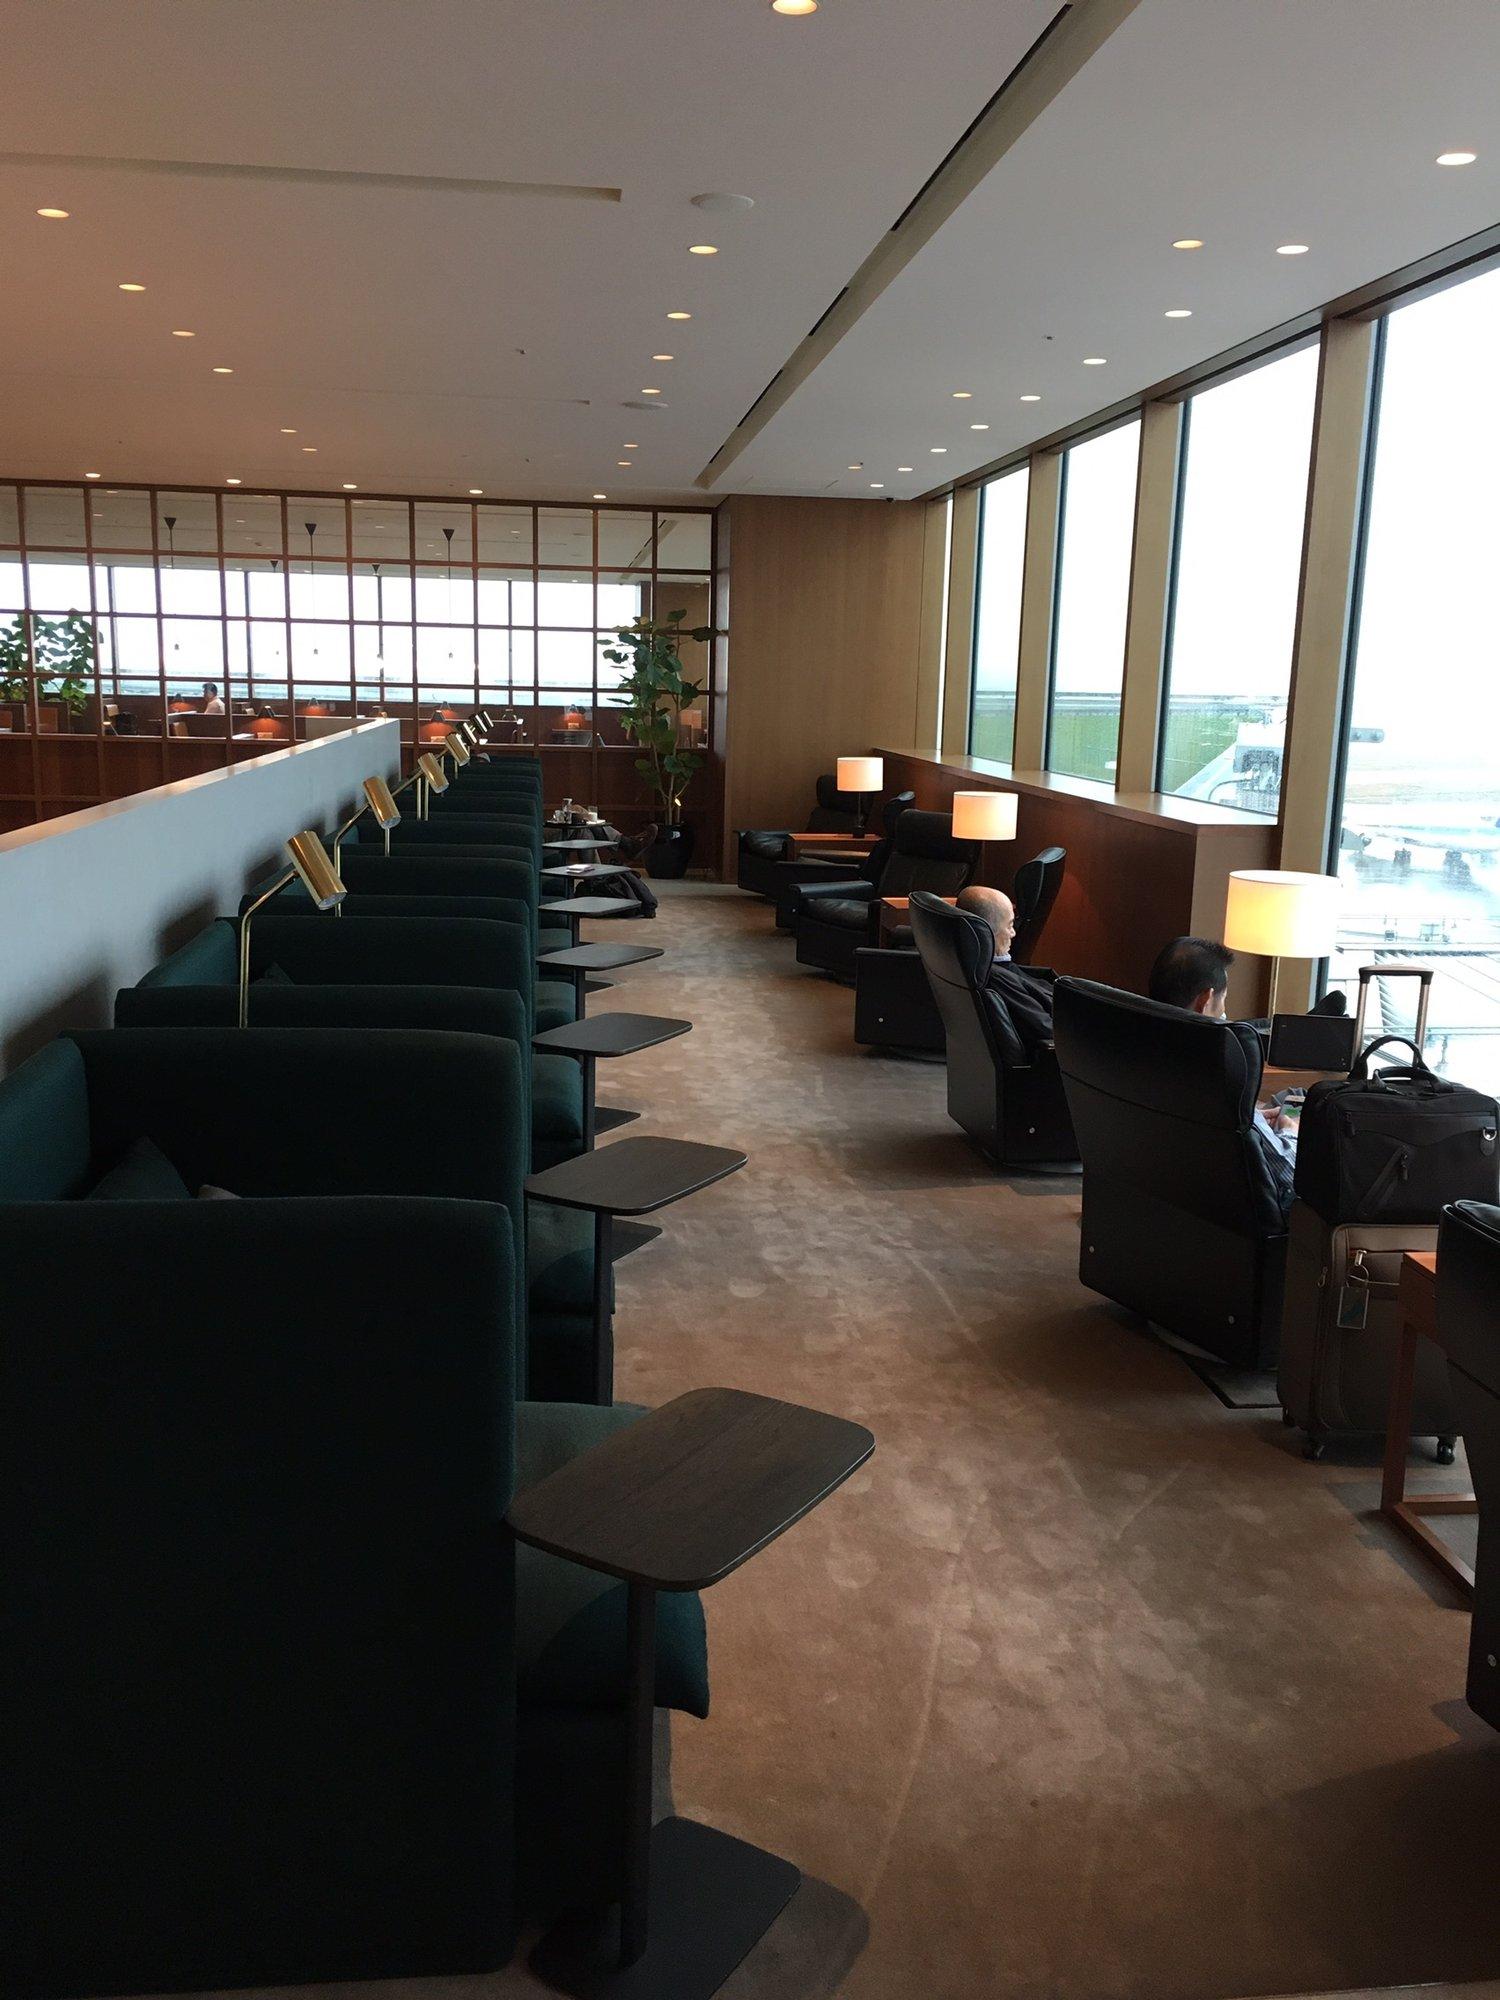 Cathay Pacific Lounge image 20 of 49